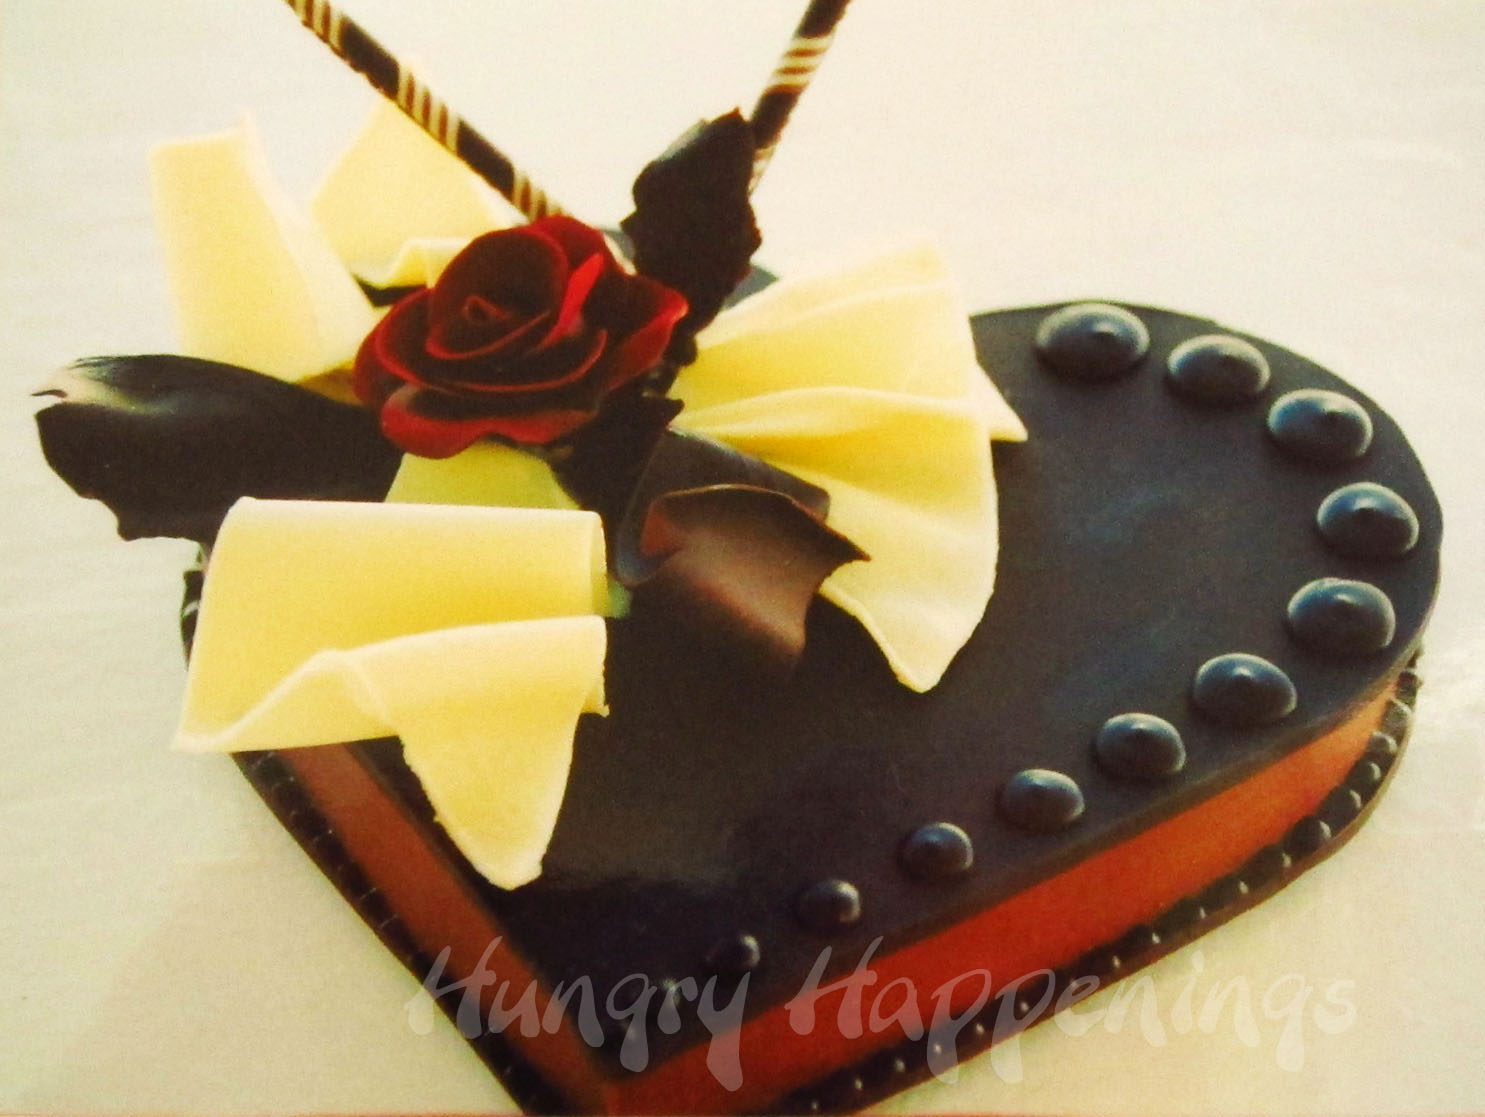 elegant+chocolate+box+with+modeling+chocolate+roses+for+Valentine's+Day+.jpg